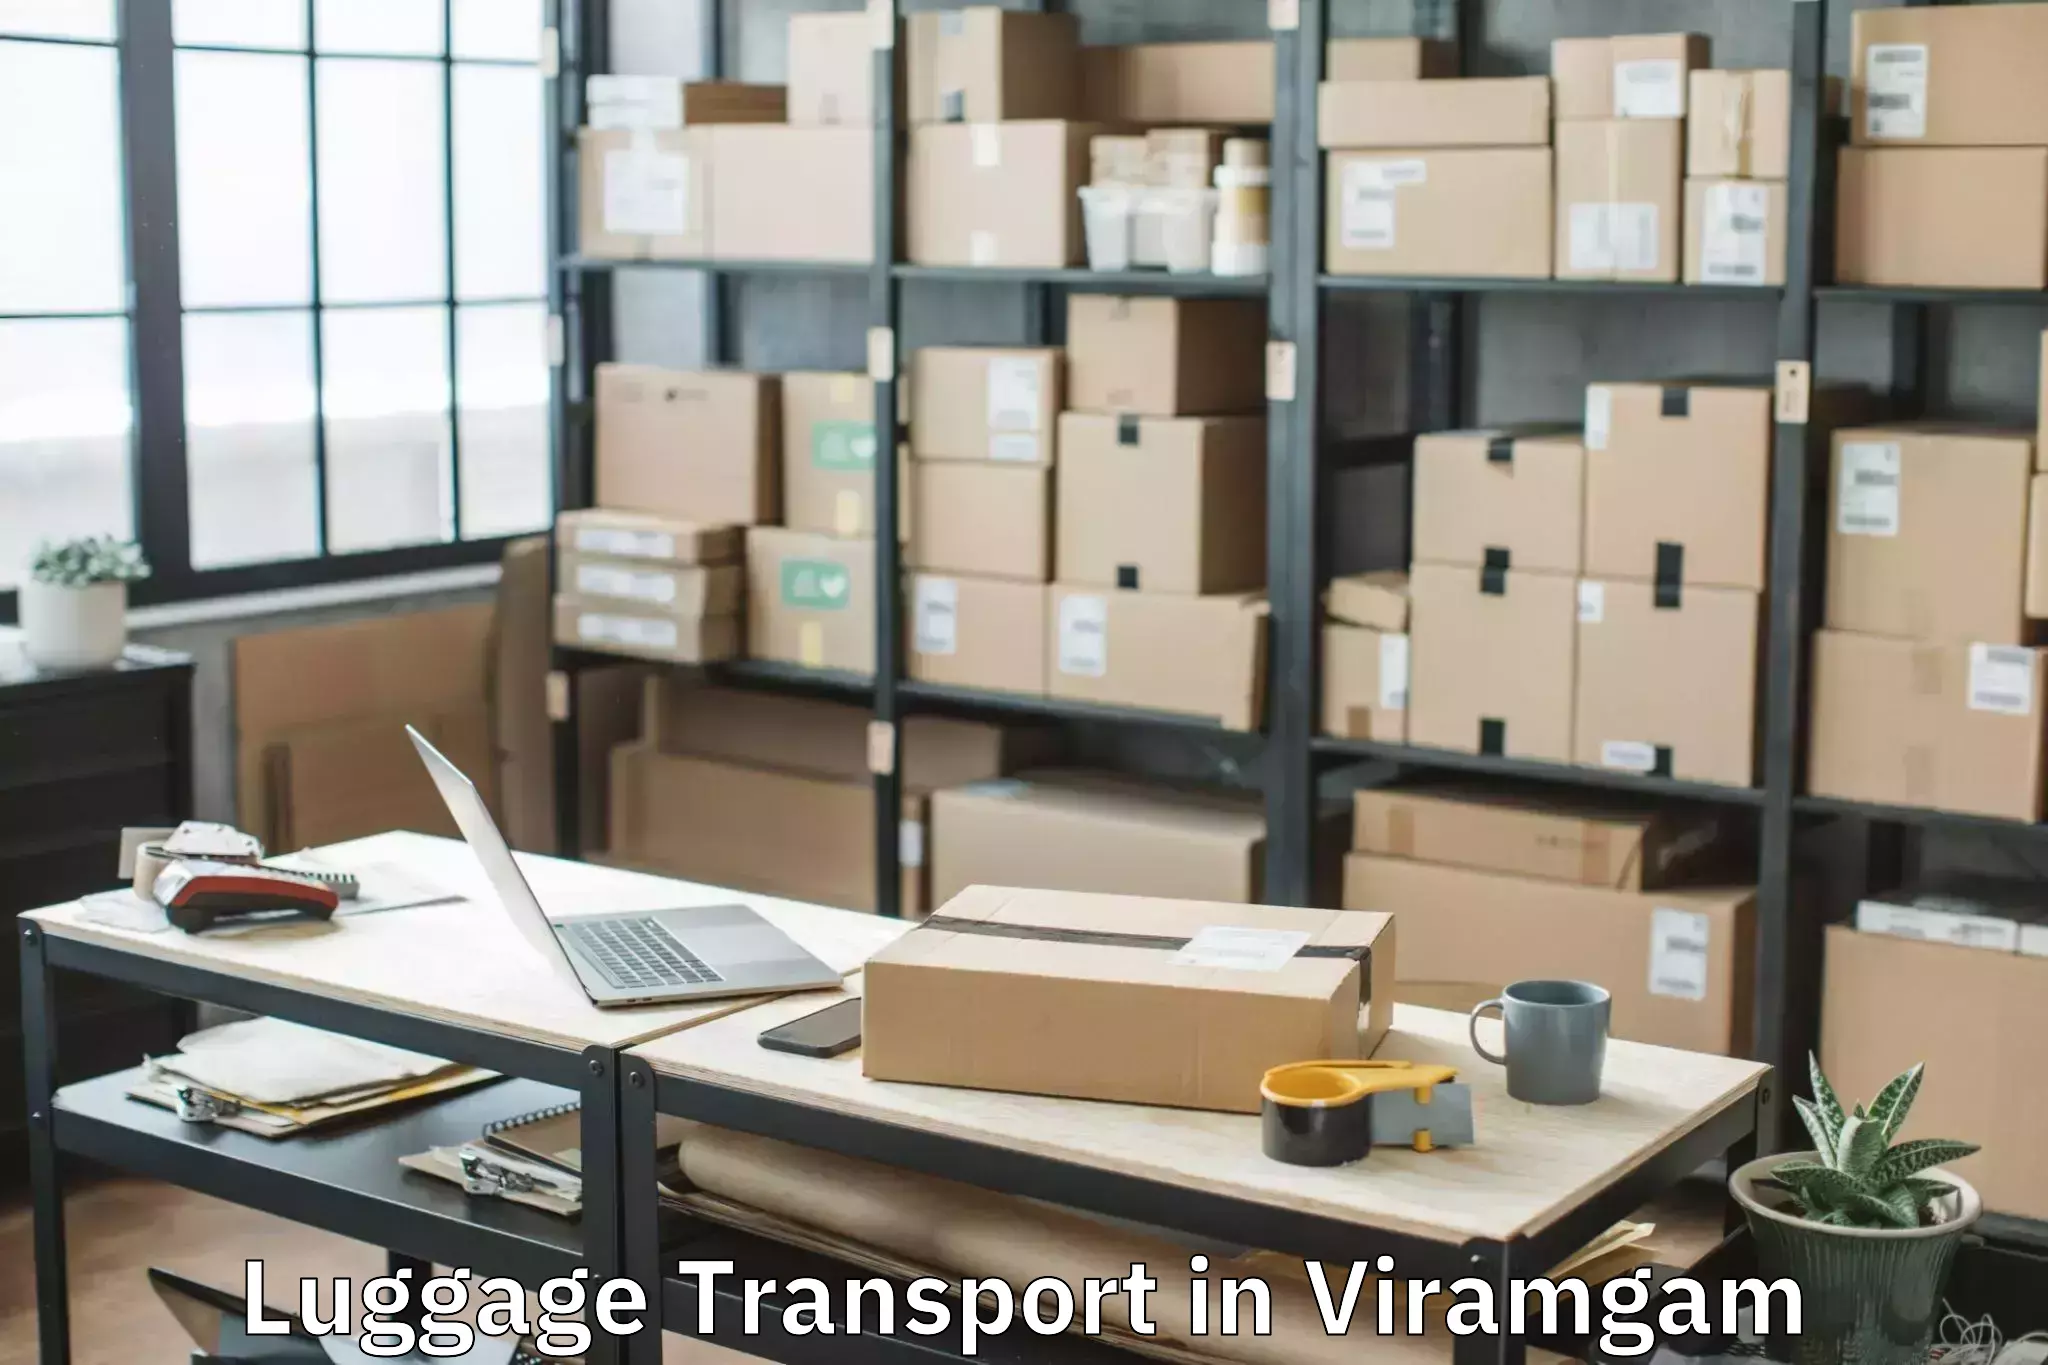 Instant baggage transport quote in Viramgam